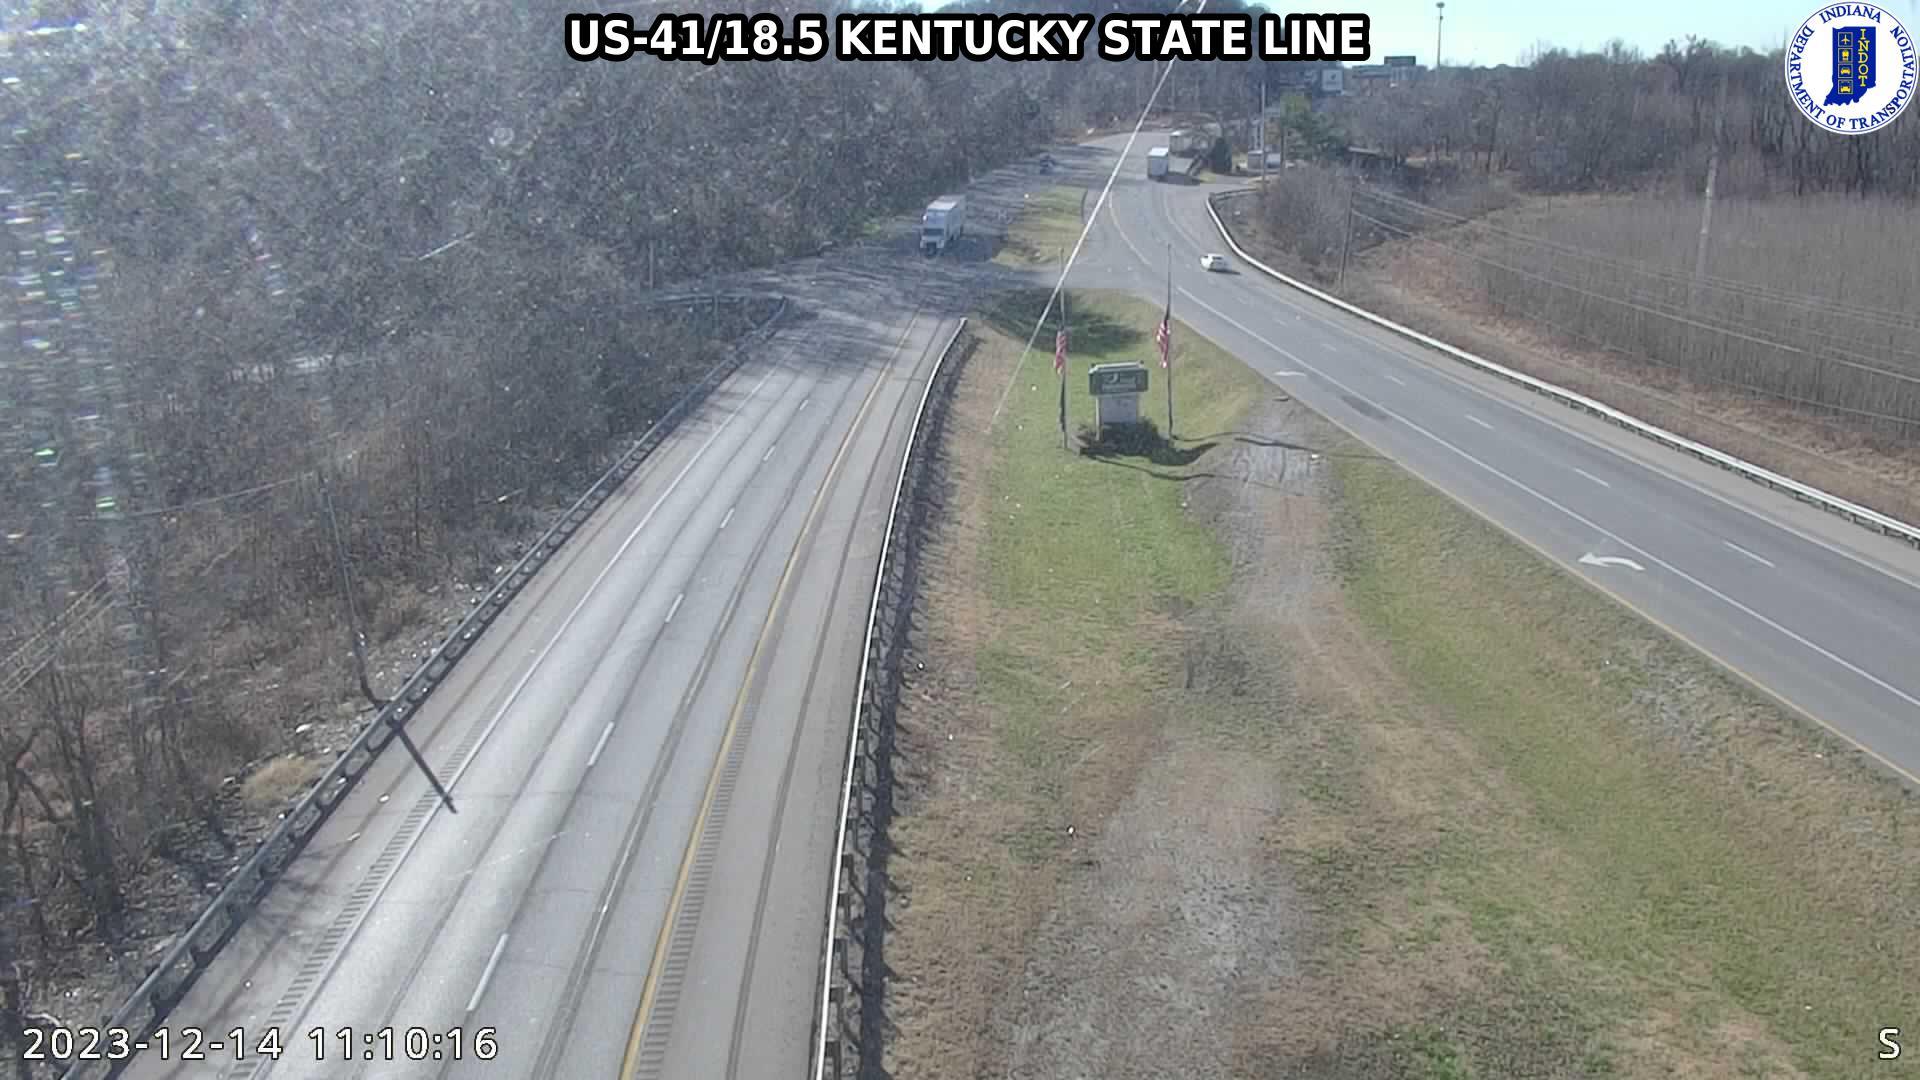 Traffic Cam Henderson: KY US-41: US-41/18.5 - STATE LINE: US-41/18.5 - STATE LINE